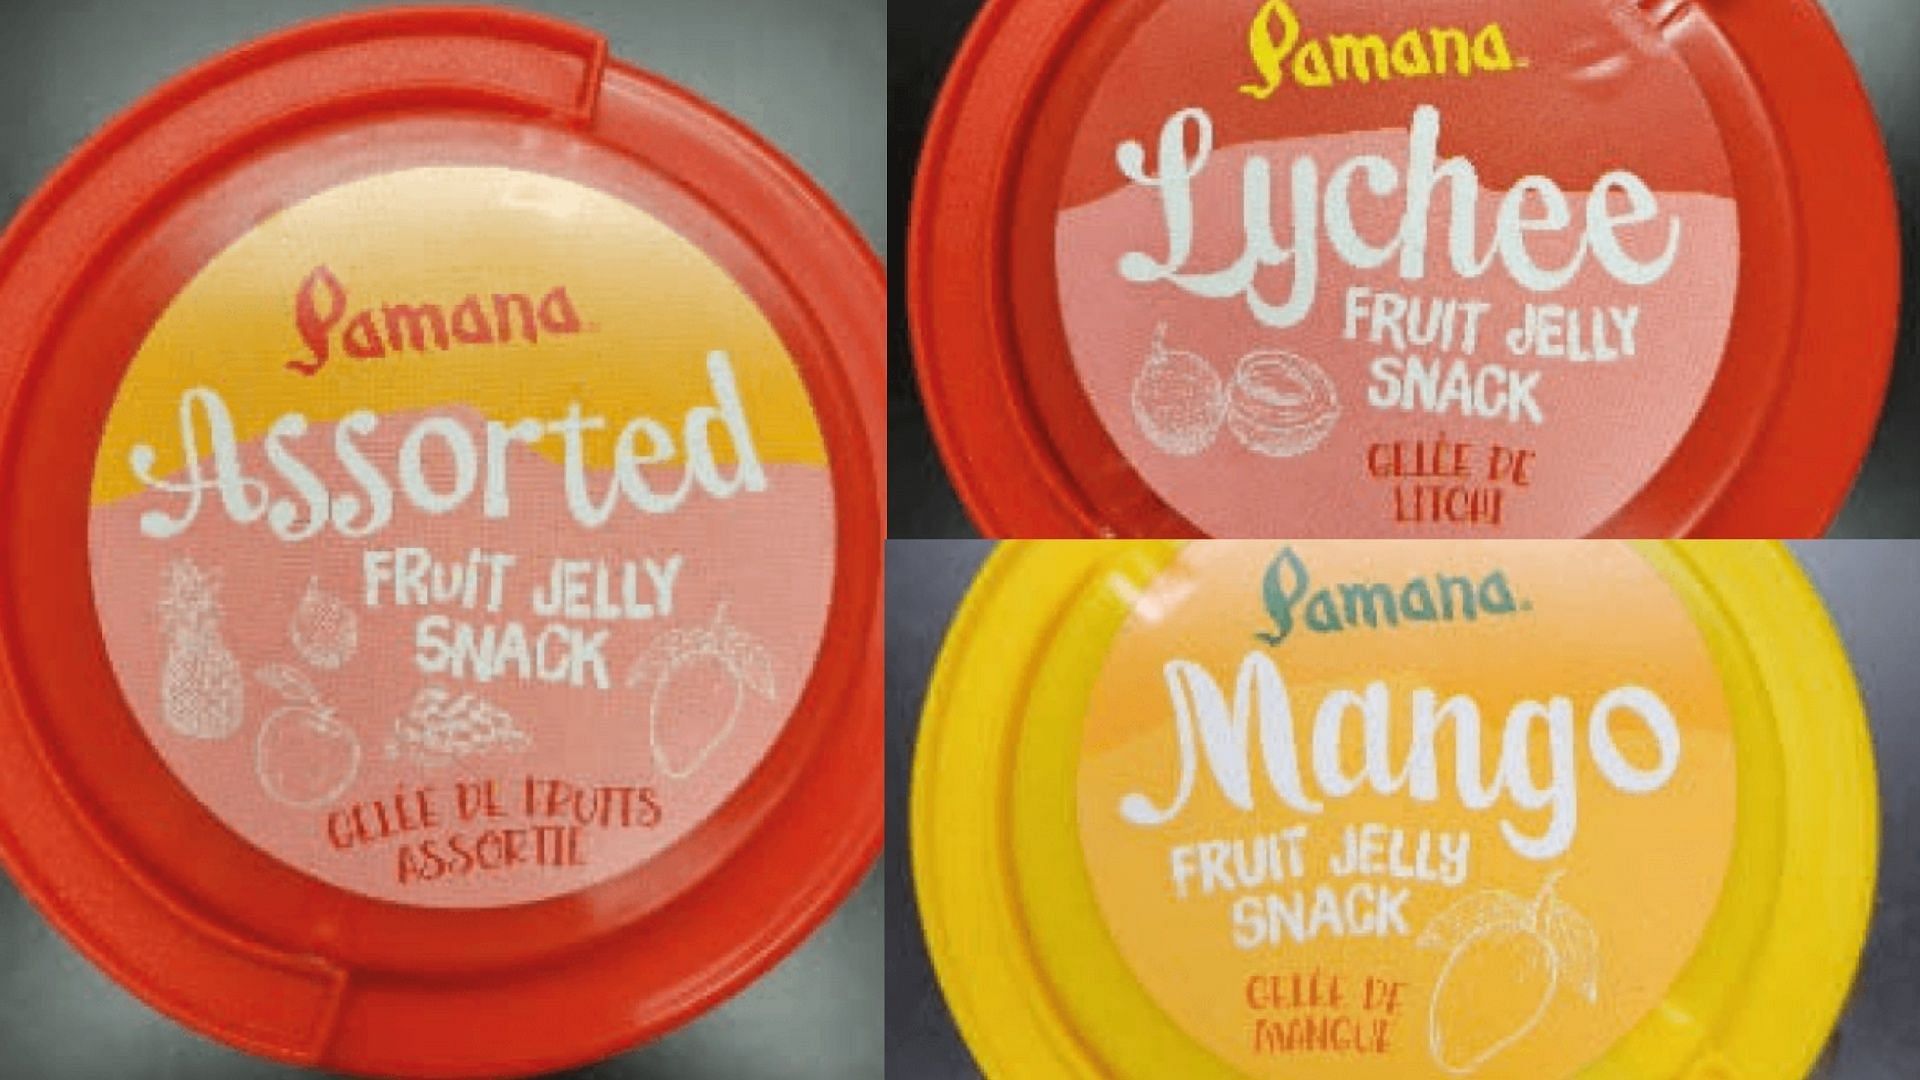 The recalled Mini Fruit Jelly Cup products may pose a choking hazard and could even cause death in rare cases (Image via Food and Drug Administration)